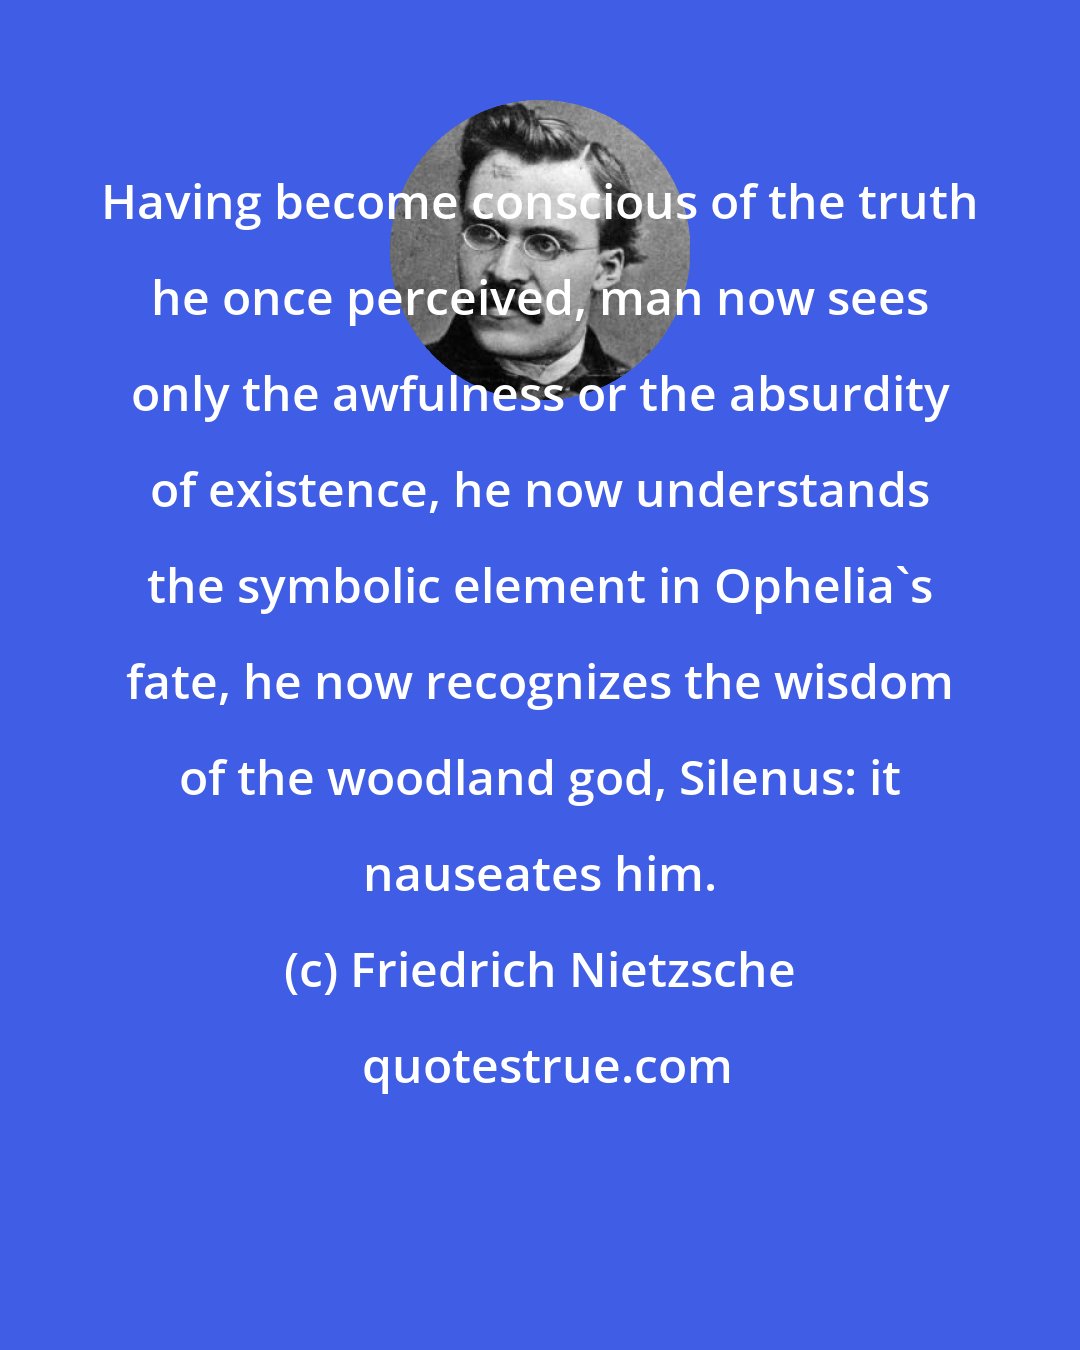 Friedrich Nietzsche: Having become conscious of the truth he once perceived, man now sees only the awfulness or the absurdity of existence, he now understands the symbolic element in Ophelia's fate, he now recognizes the wisdom of the woodland god, Silenus: it nauseates him.